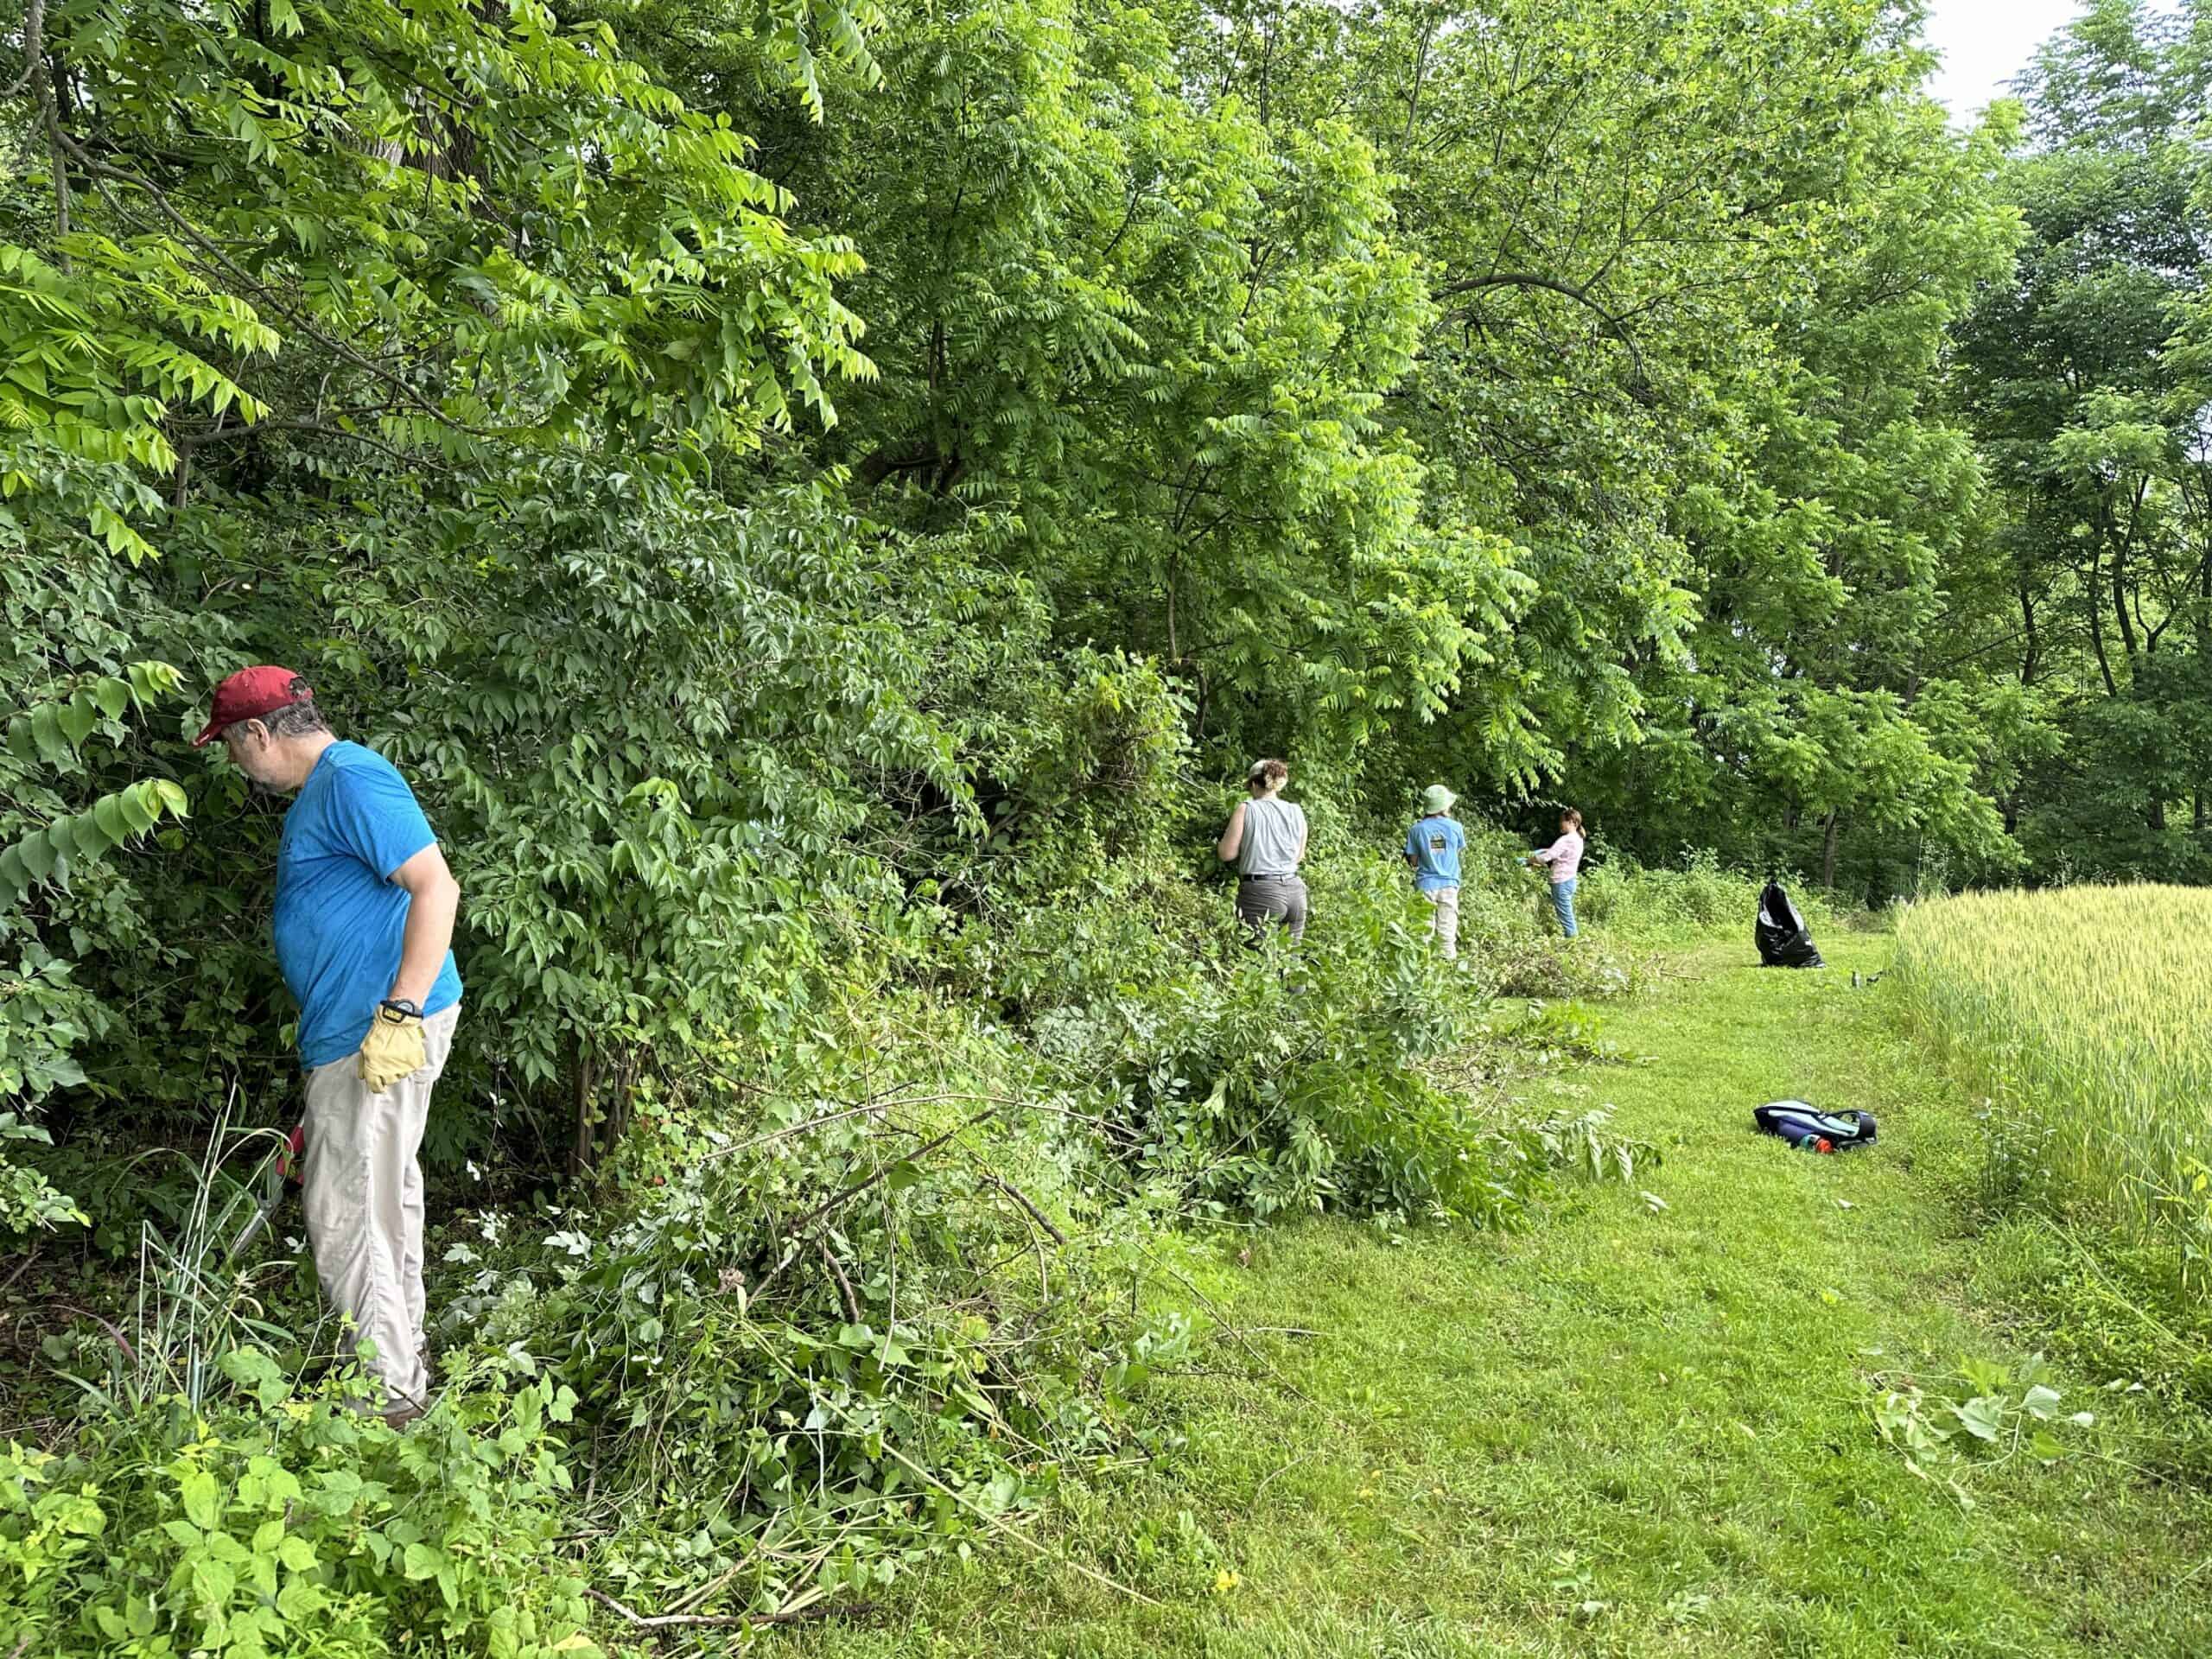 Volunteers cutting invasive vines and shrubs  in a hedgerow of lush foliage.